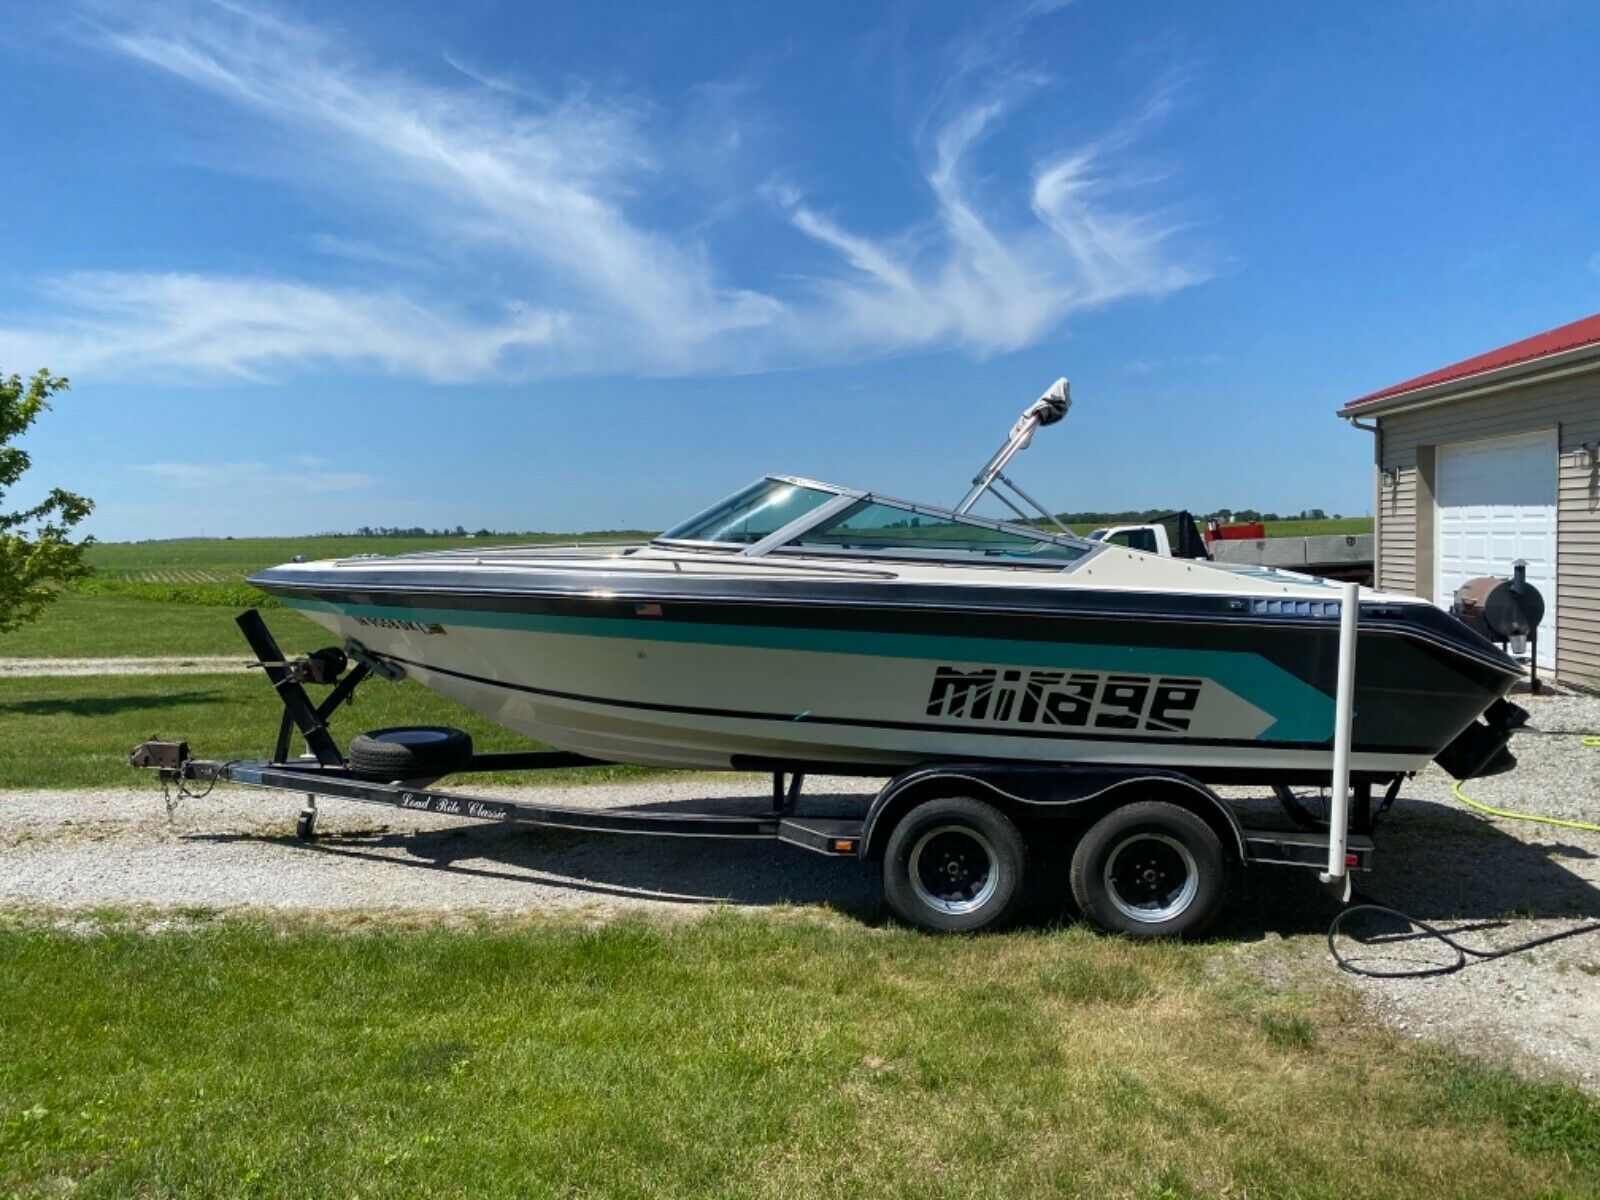 Mirage For Sale For Boats From Usa